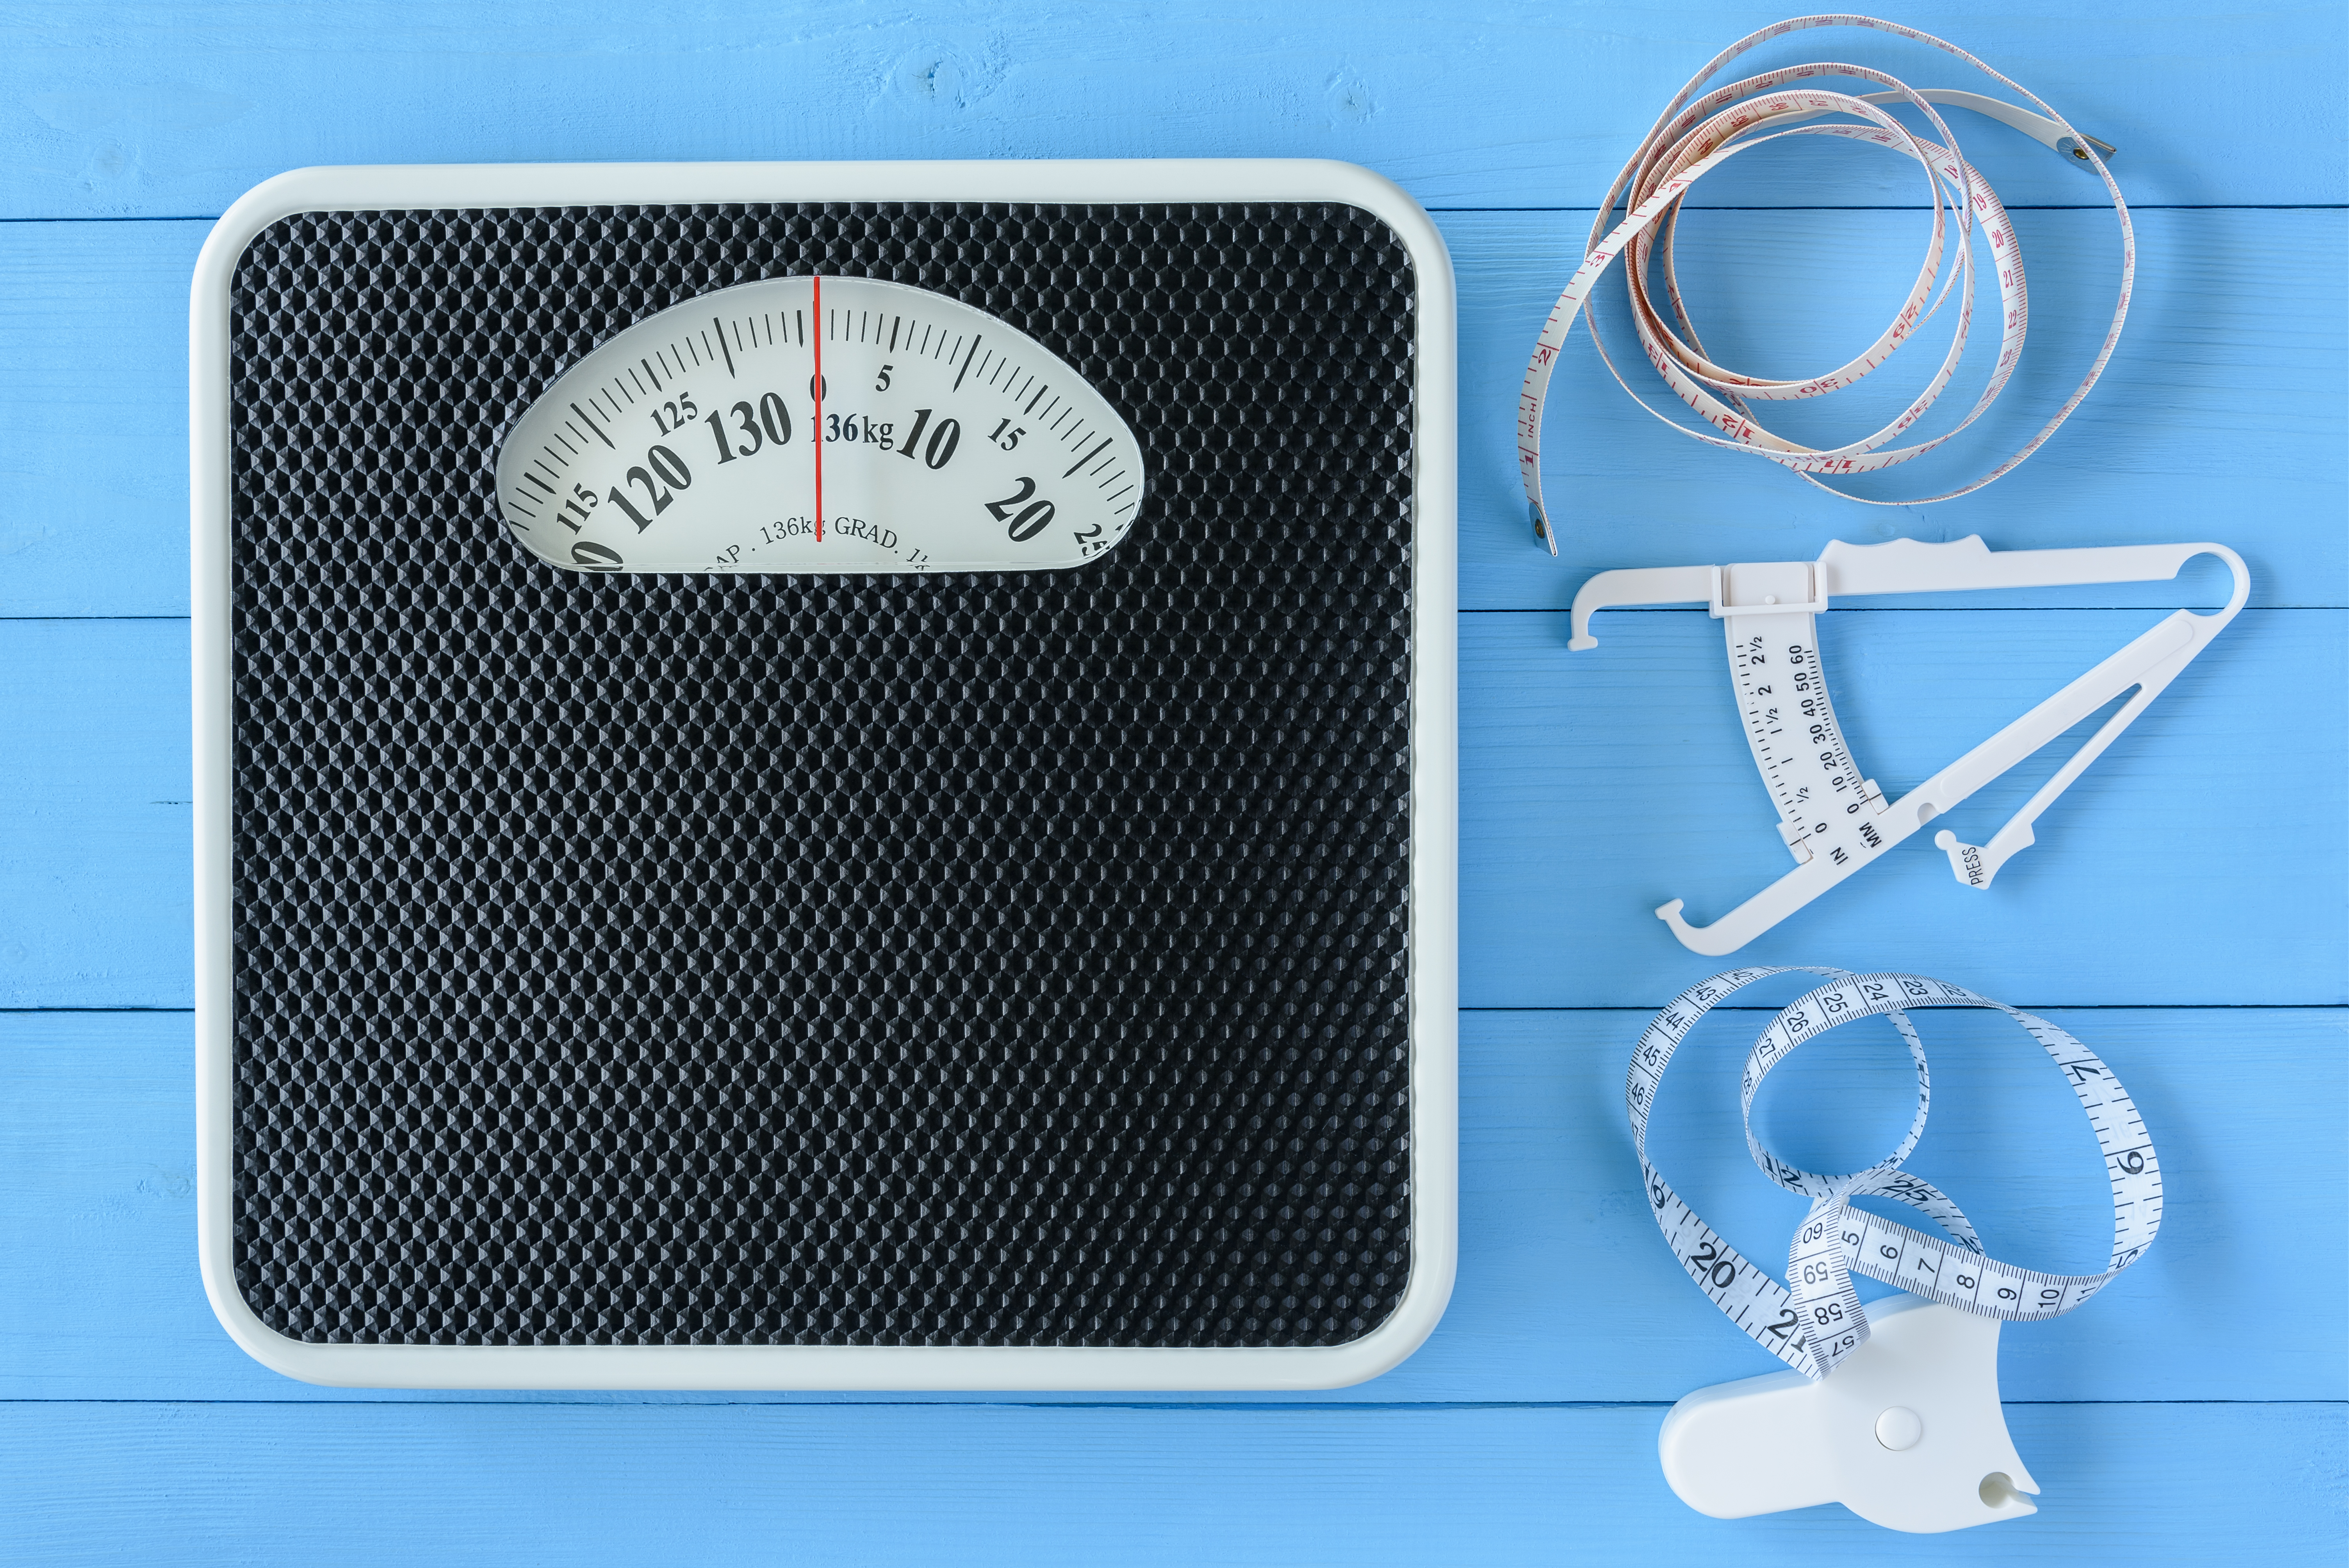 6 Methods of Measuring Body Fat and Their Pros and Cons - Muscle